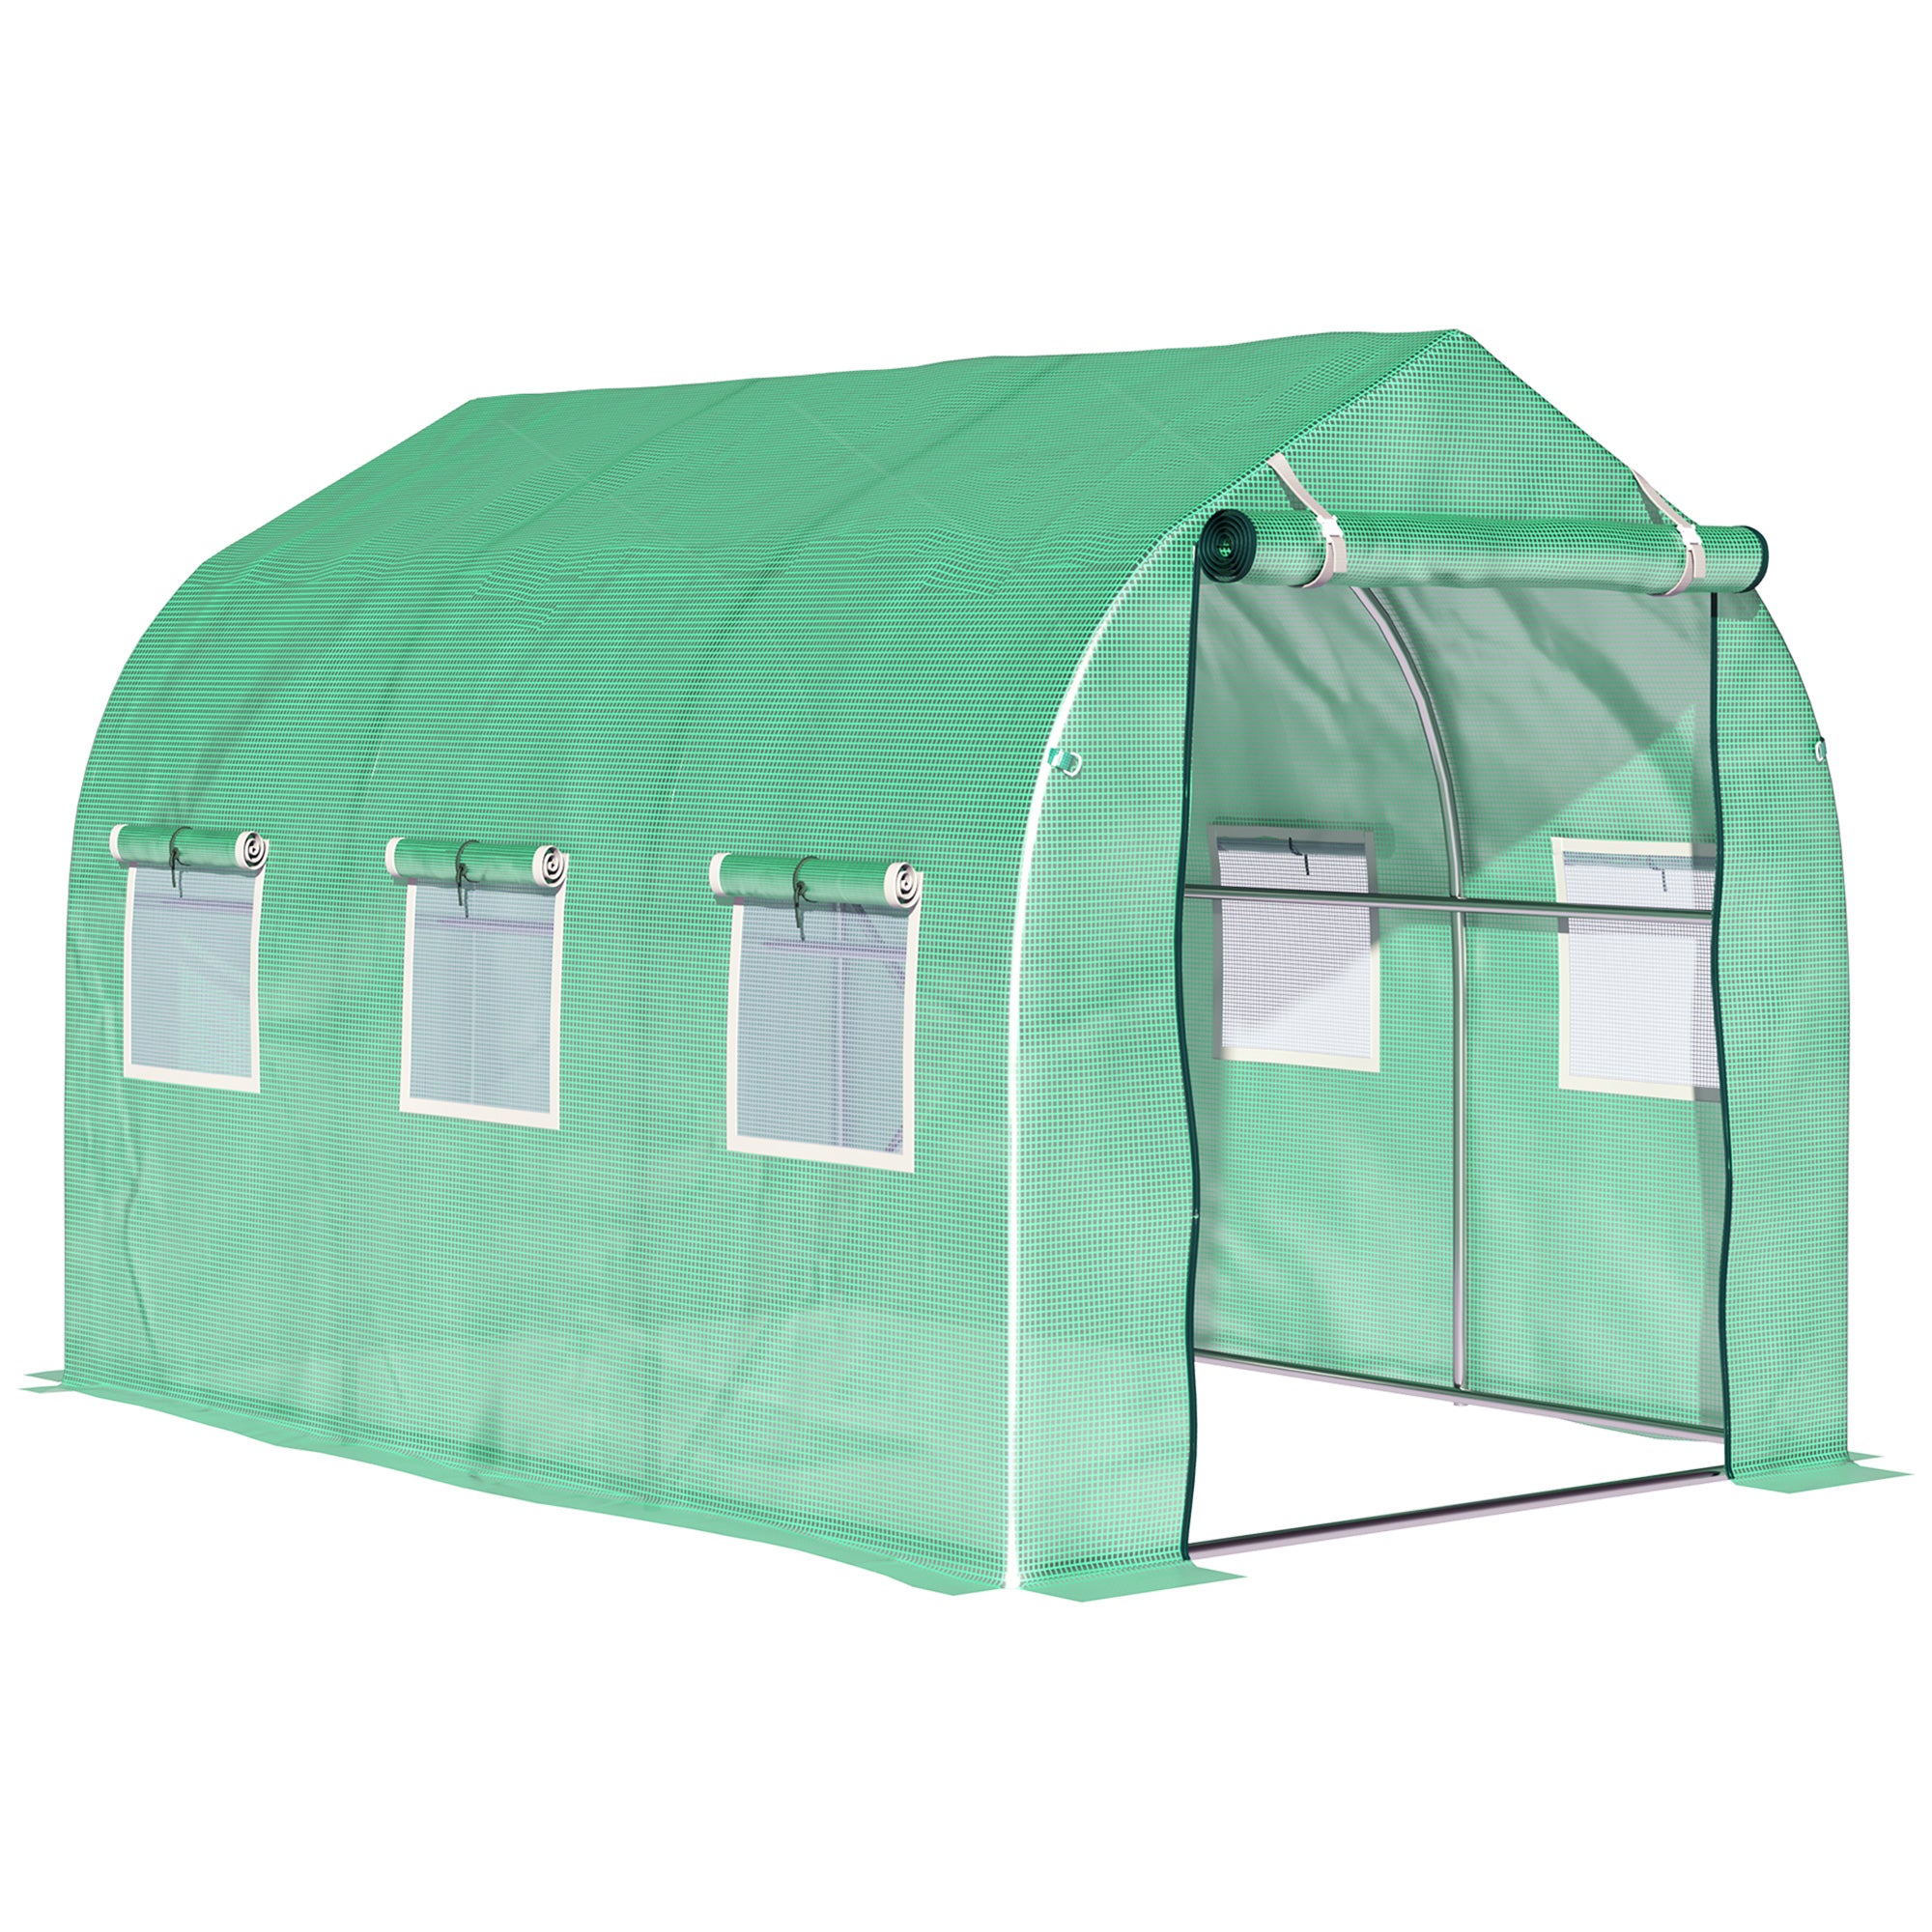 Outsunny 3 x 2 M Walk in Polytunnel Greenhouse Galvanised Steel w/ Zipped Door  | TJ Hughes